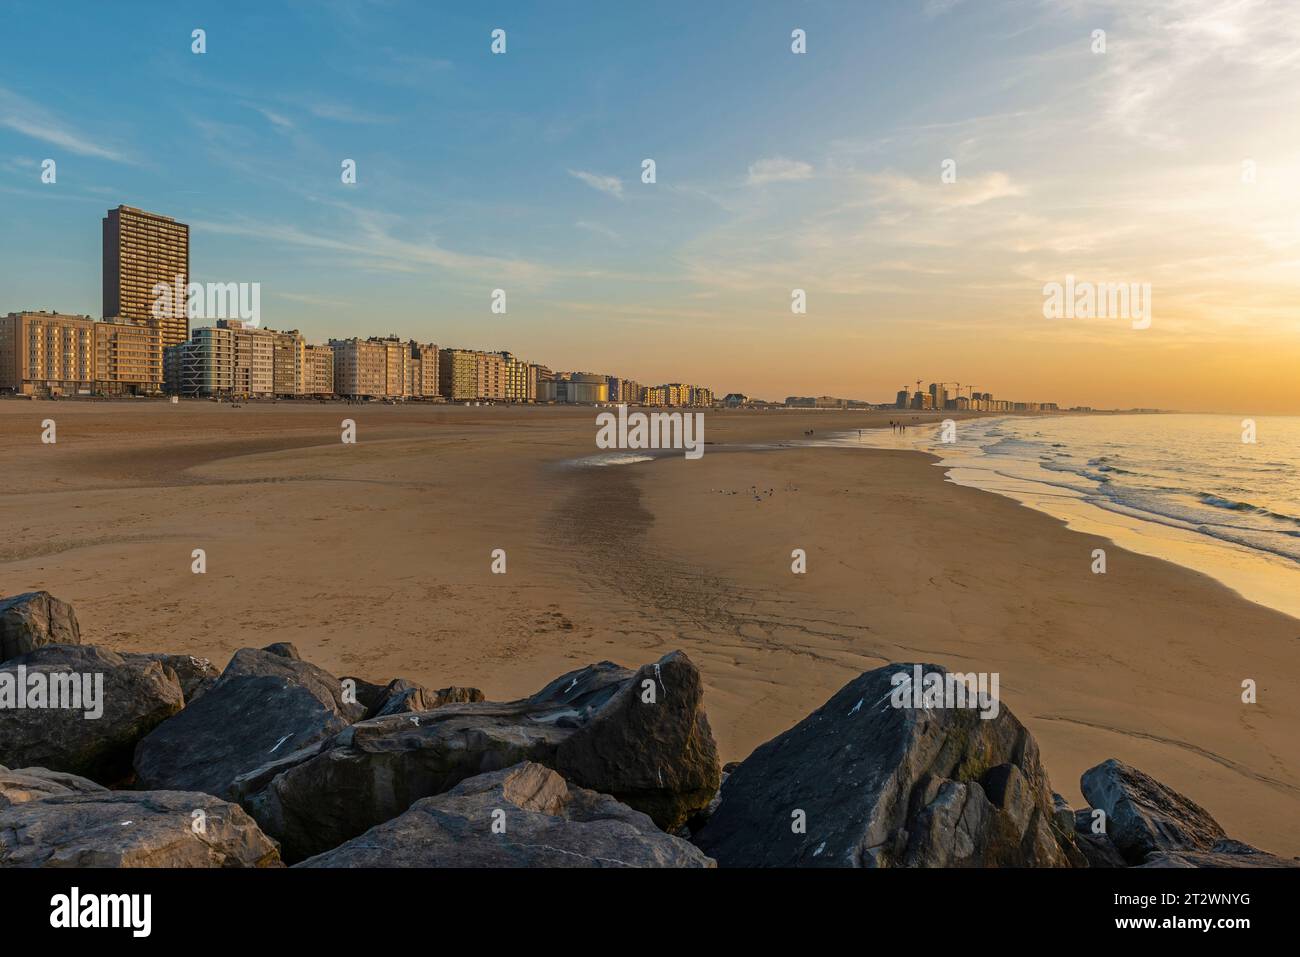 Oostende city skyline and North Sea beach at sunset, Flanders, Belgium. Stock Photo